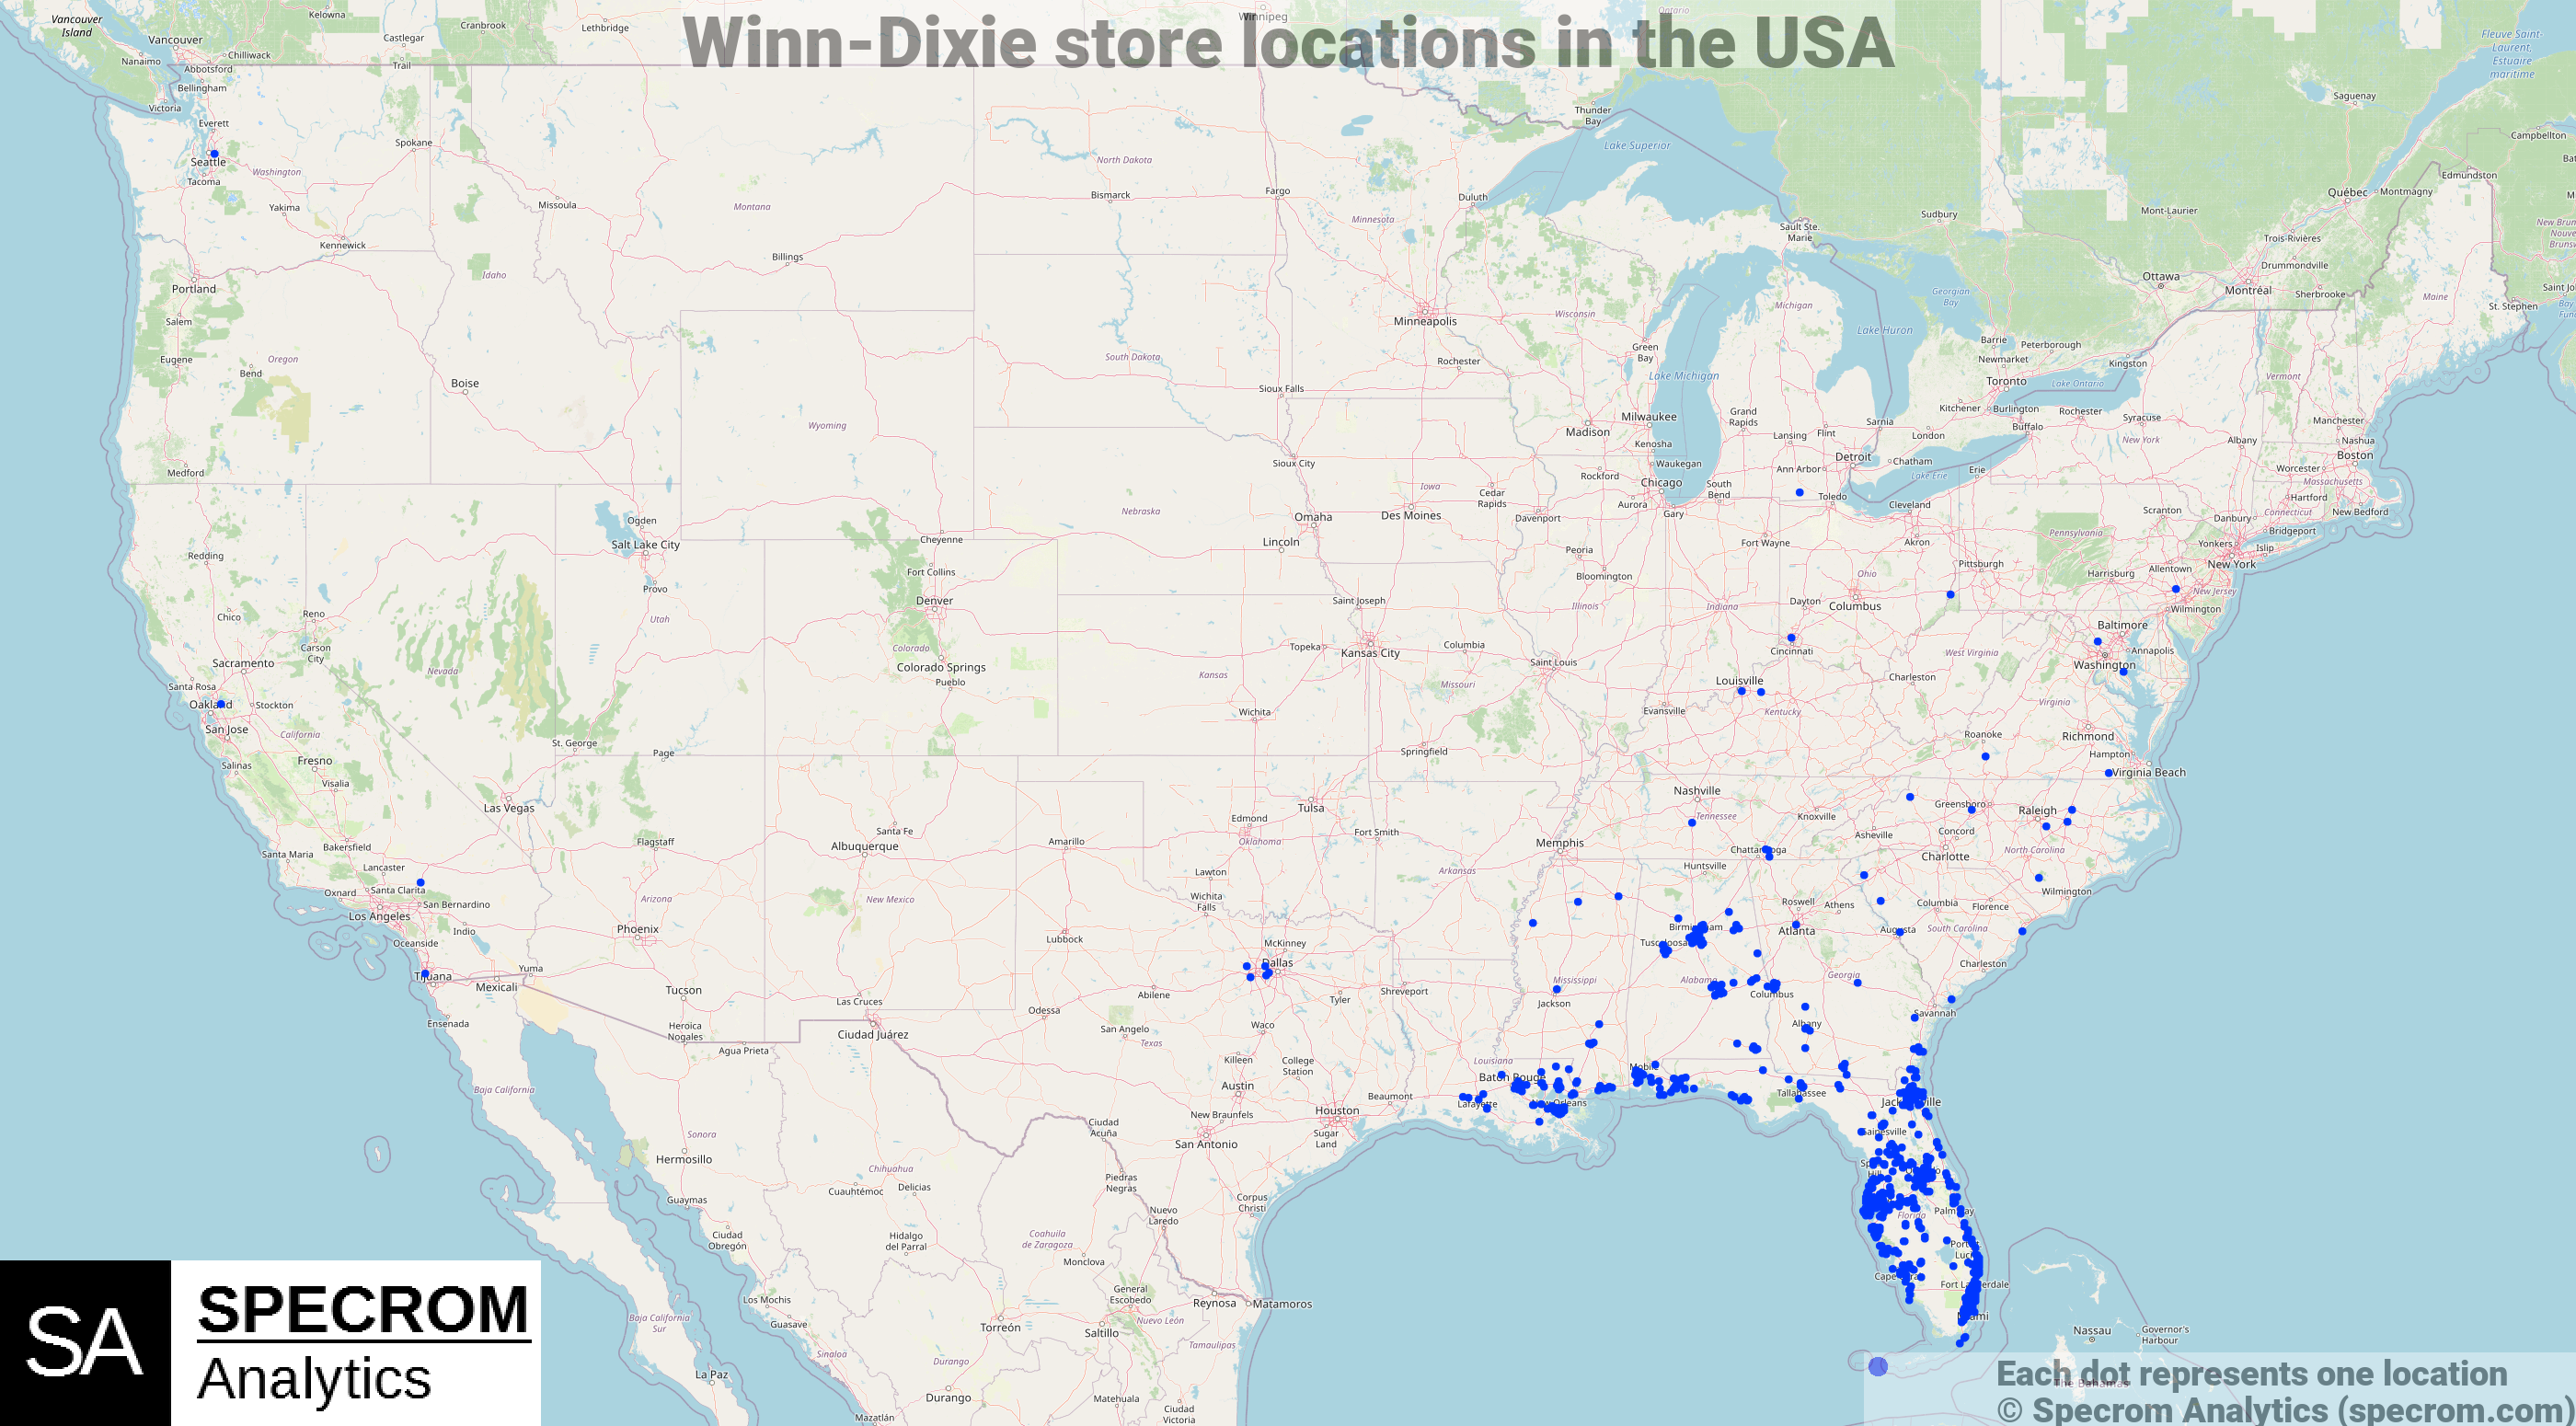 Winn-Dixie store locations in the USA